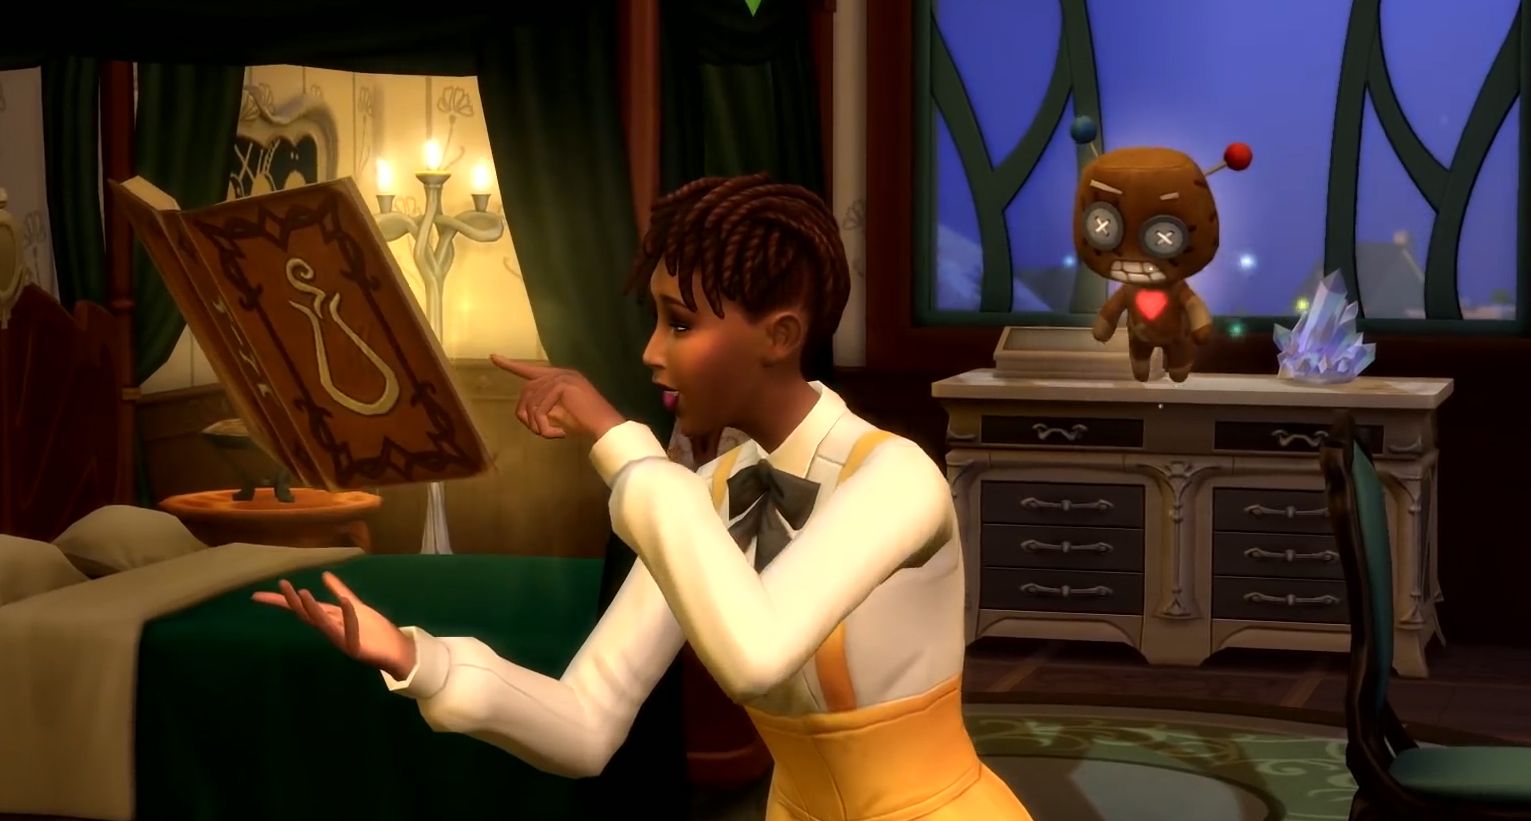 A sim learns a magic spell in The Sims 4 Realm of Magic